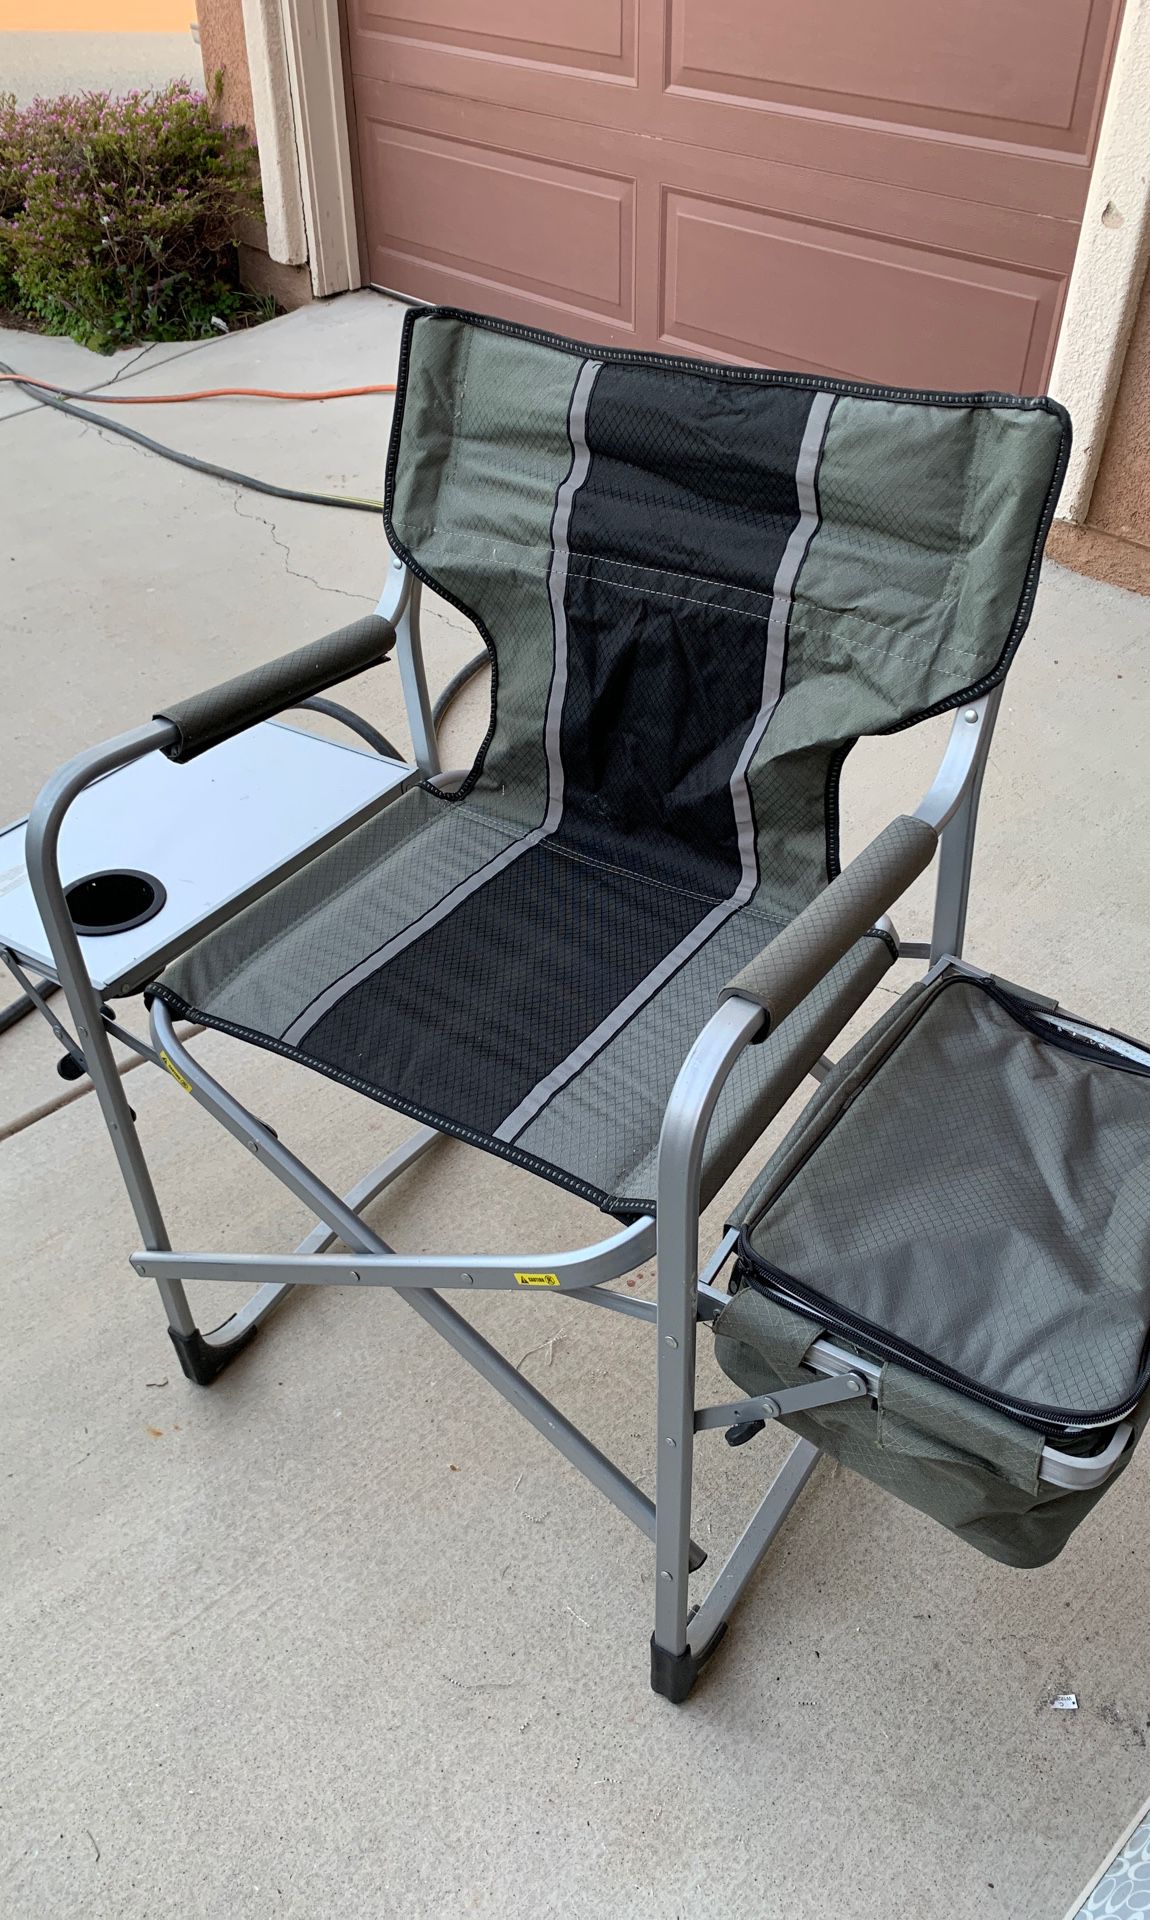 Camping chair with built in cooler